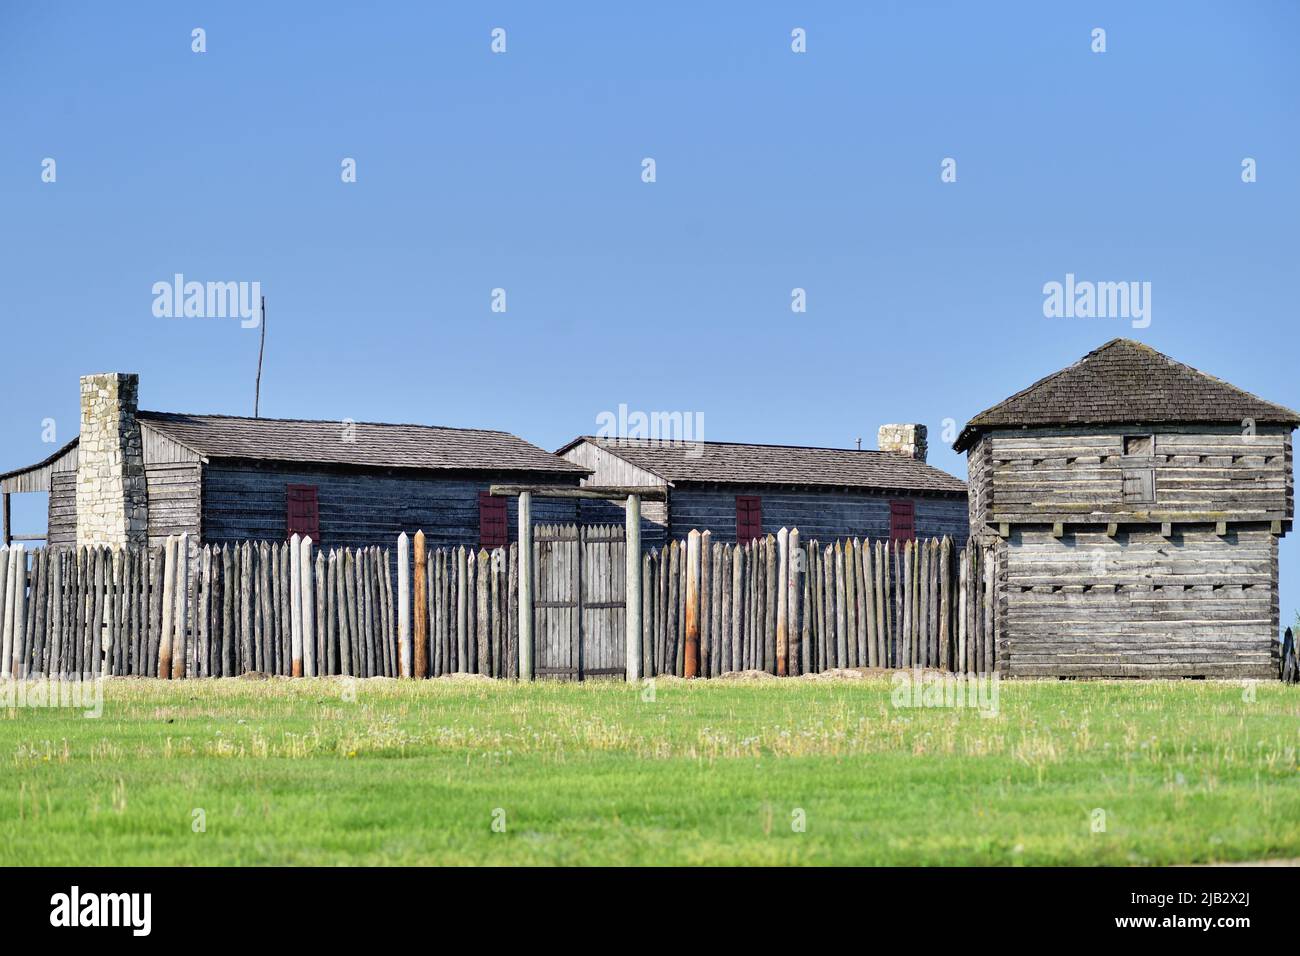 Fort Madison, Iowa, USA. Old Fort Madison, built in 1808, is located along the Mississippi River in the southeast corner of the state of Iowa. Stock Photo